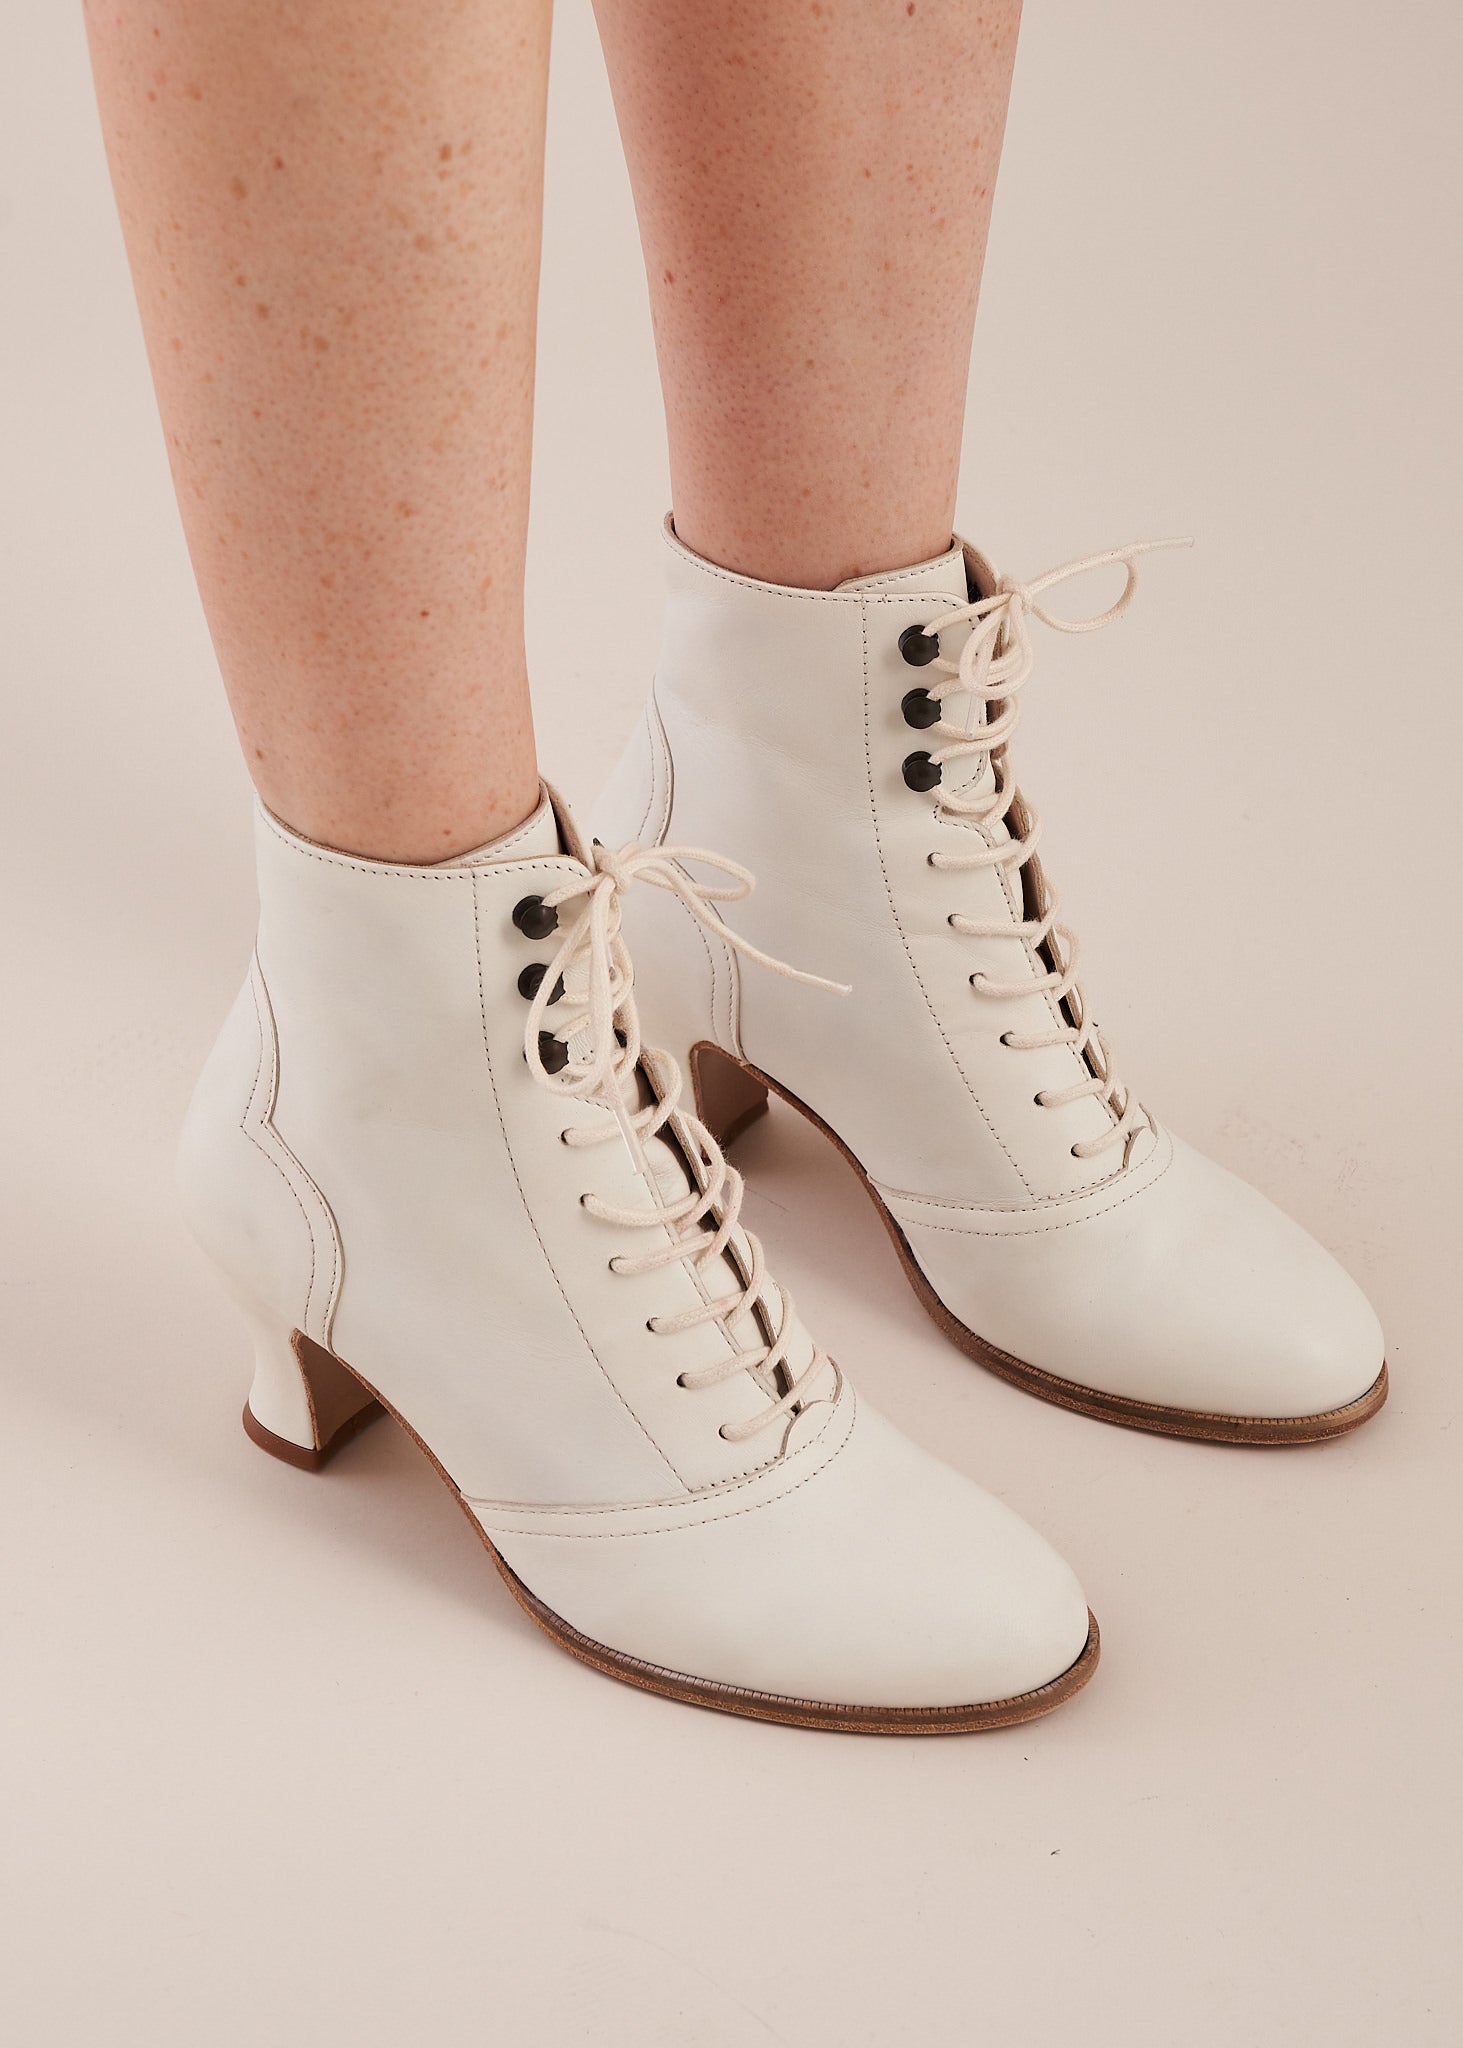 cream boots leather